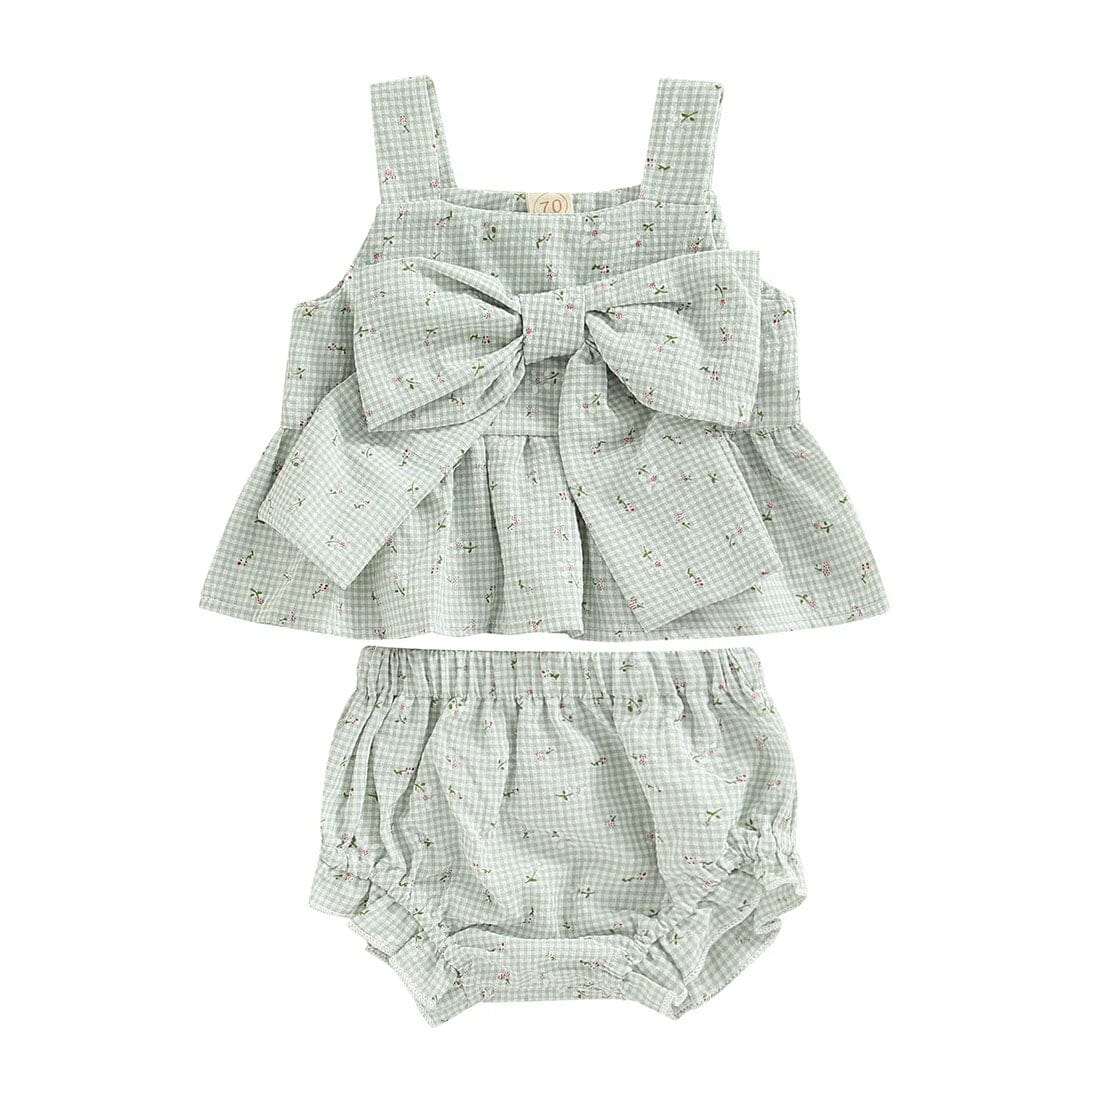 Floral Plaid Bowknot Baby Set Green 0-3 M 